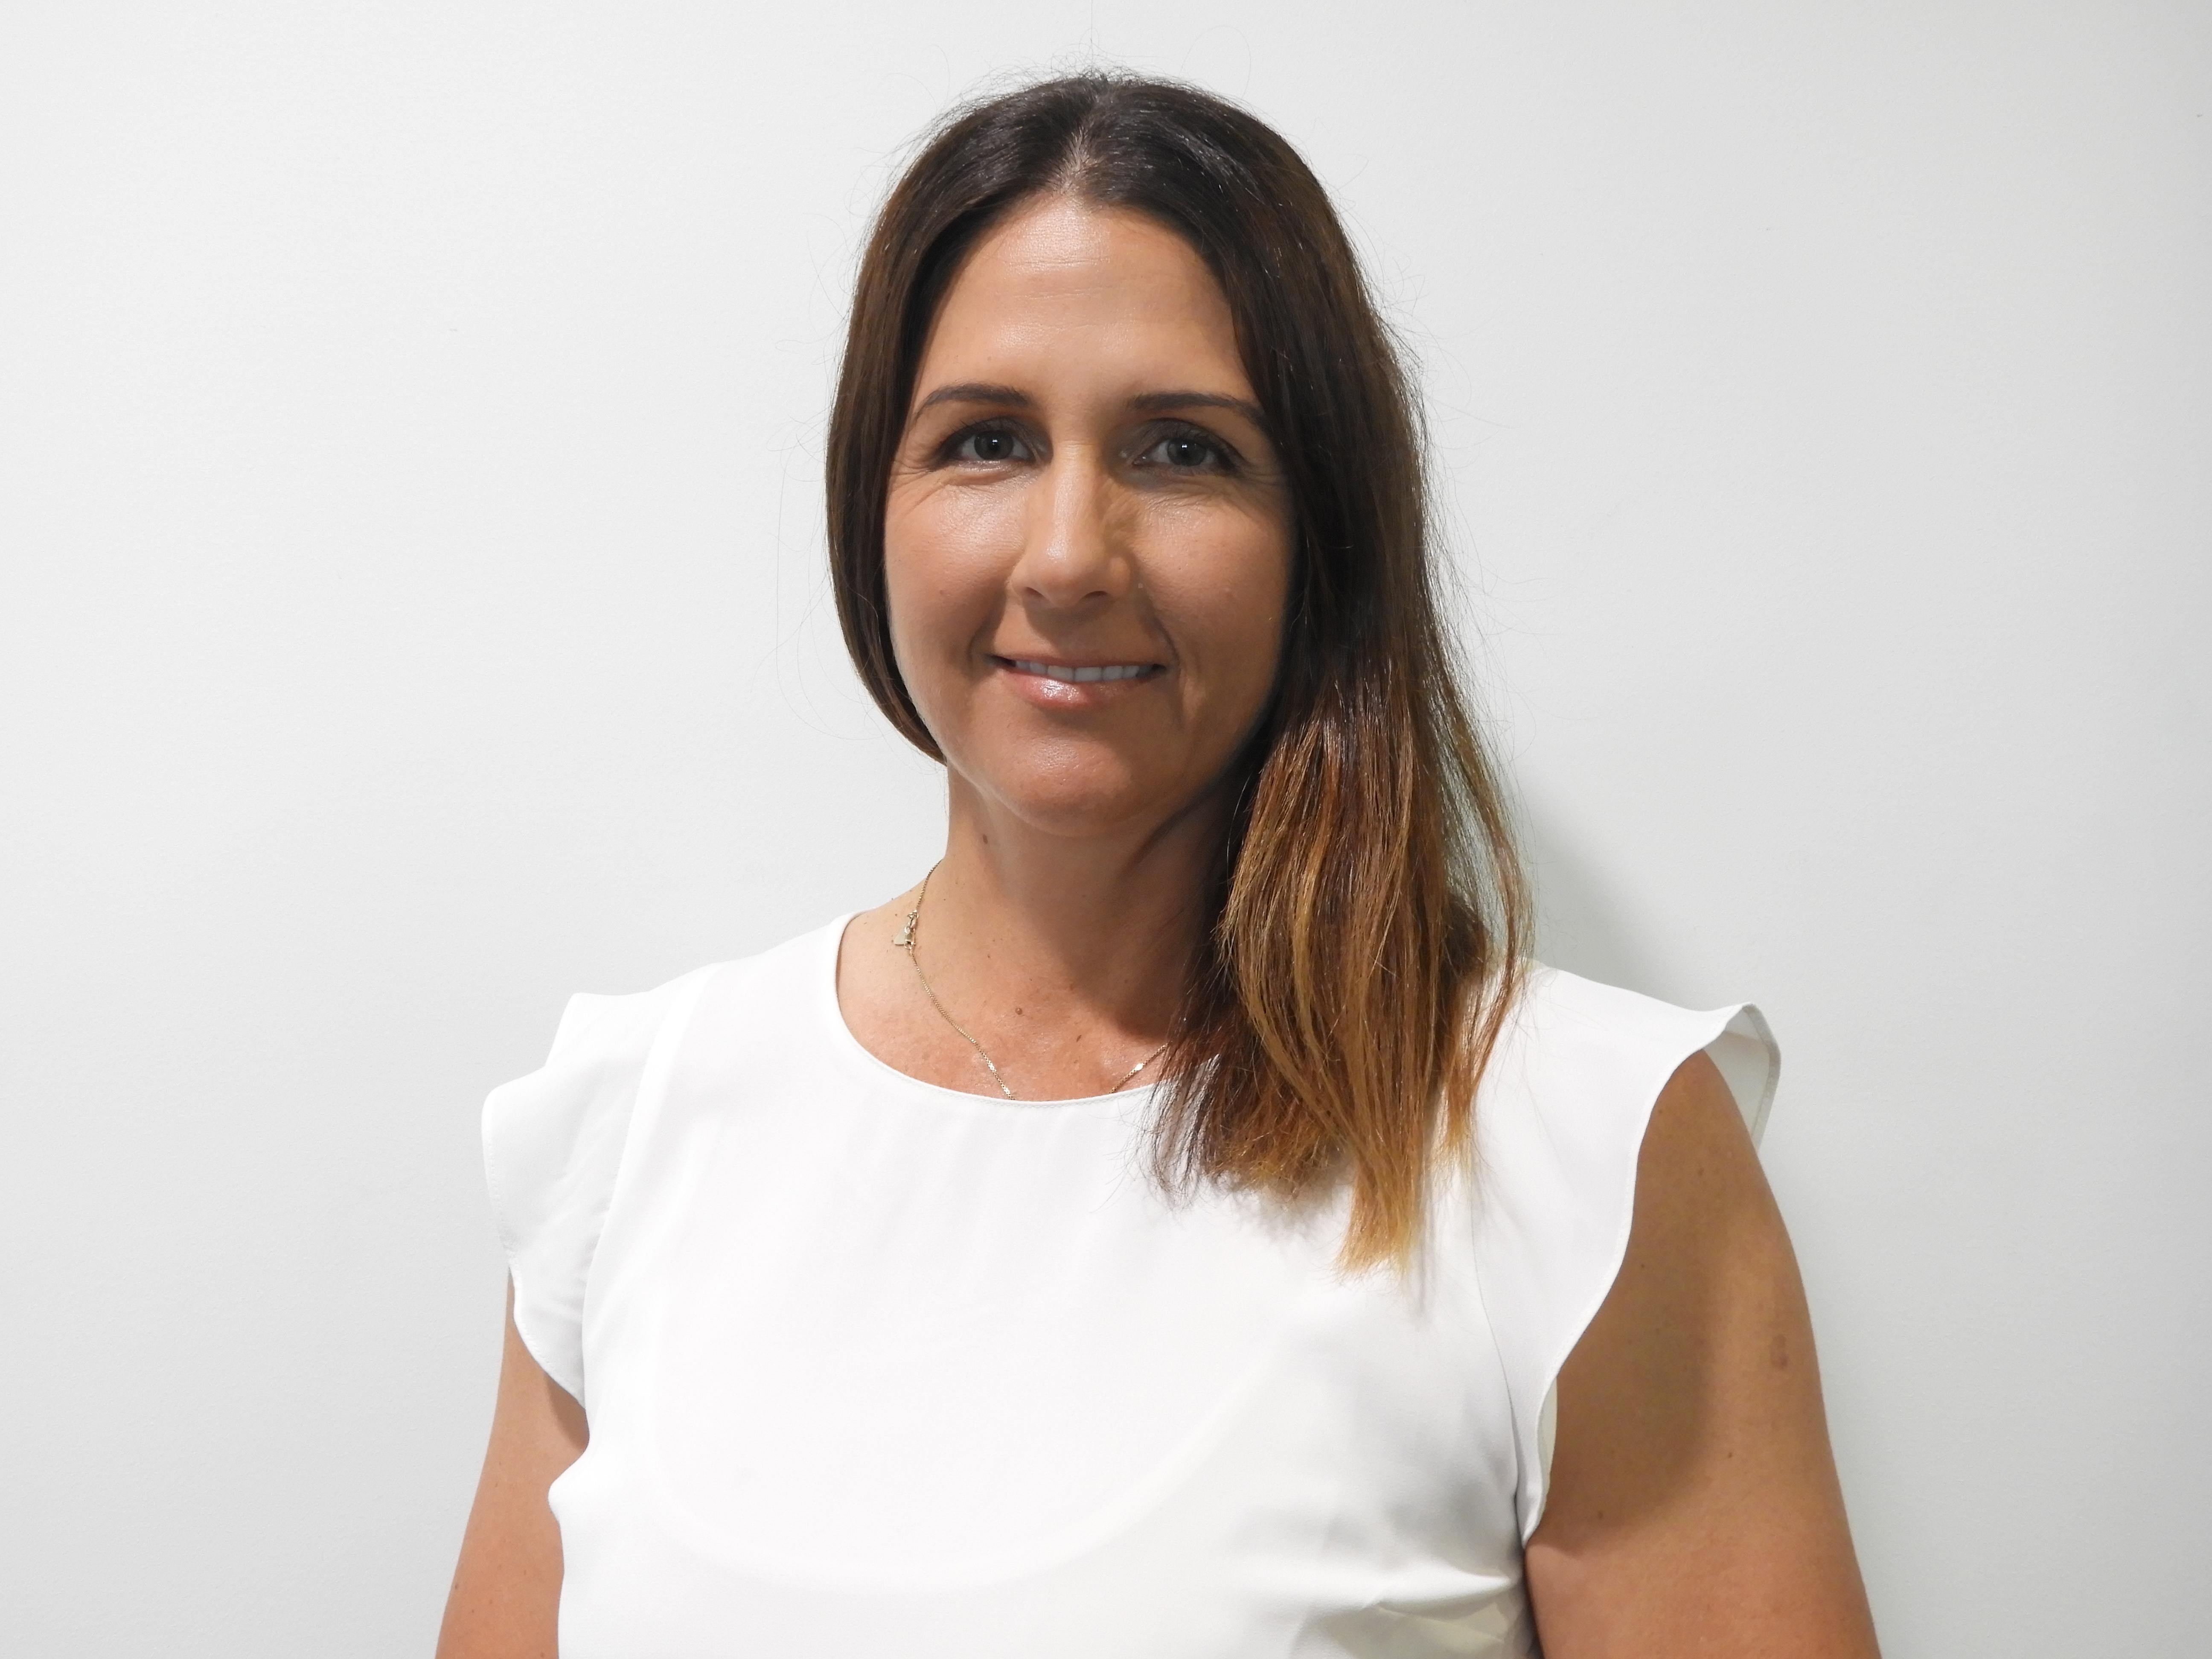 Councillor Niki Flute has been elected as the new Deputy Mayor of Flinders Shire following the recent Queensland State Elections, where she polled the highest number of candidate votes in the Shire.